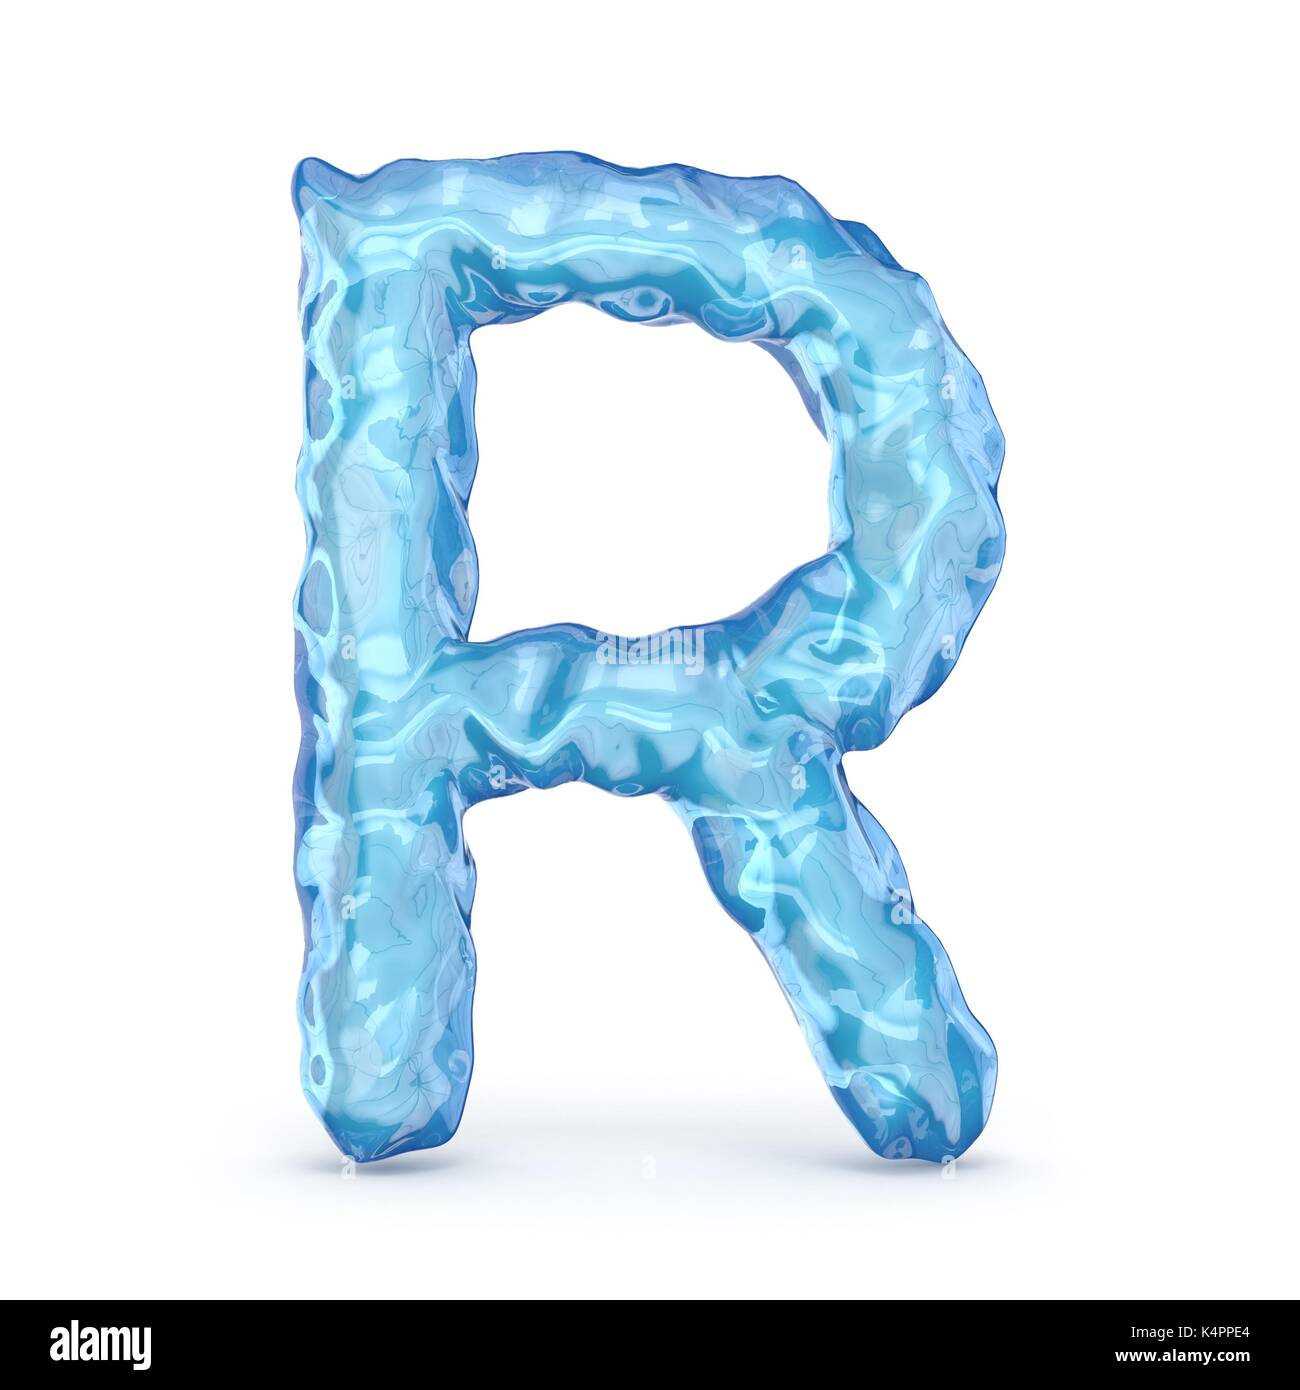 Ice font letter R 3D render illustration isolated on white background Stock Photo